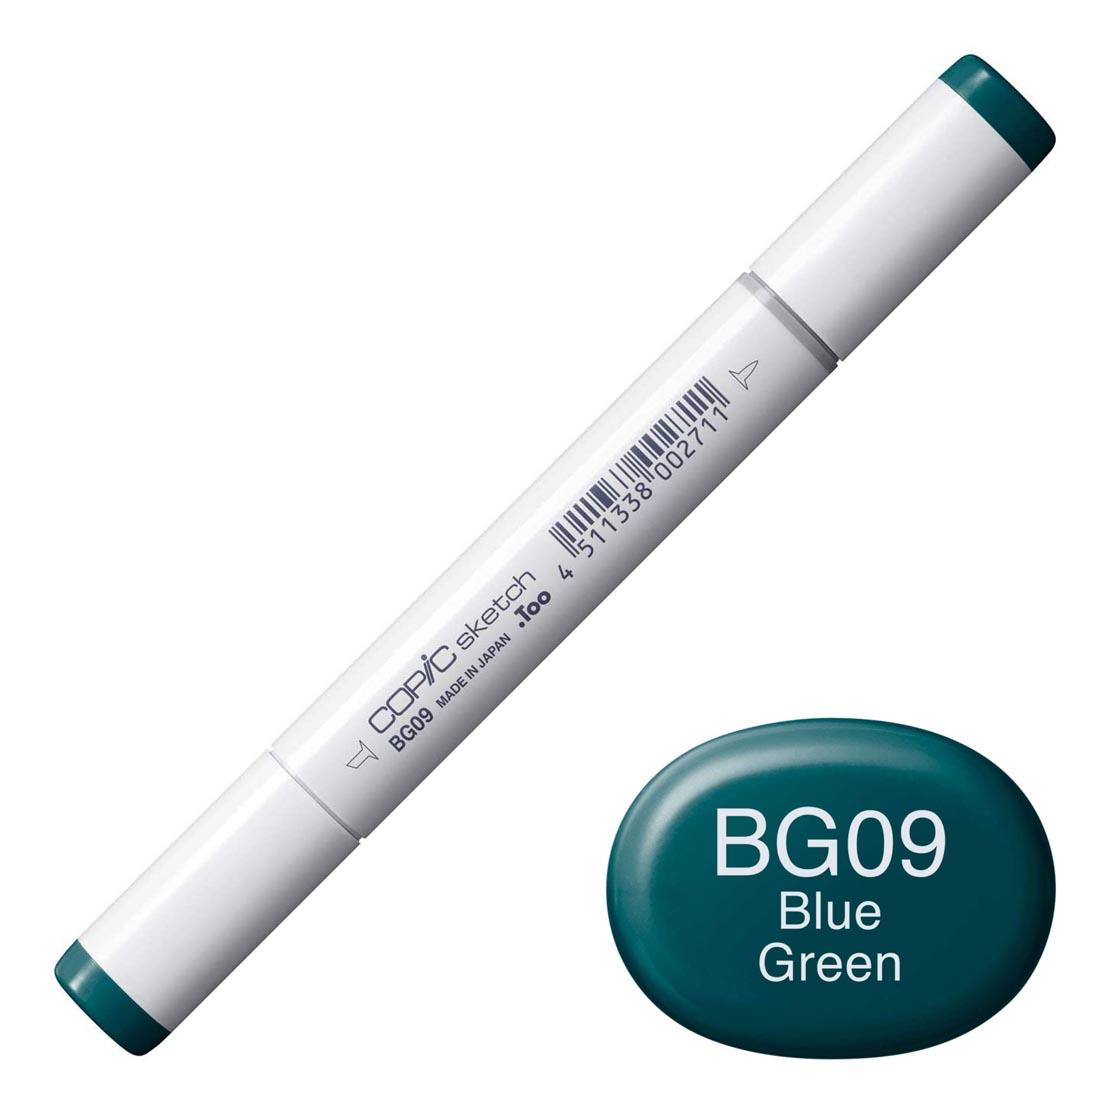 COPIC Sketch Marker with a color swatch and text of BG09 Blue Green